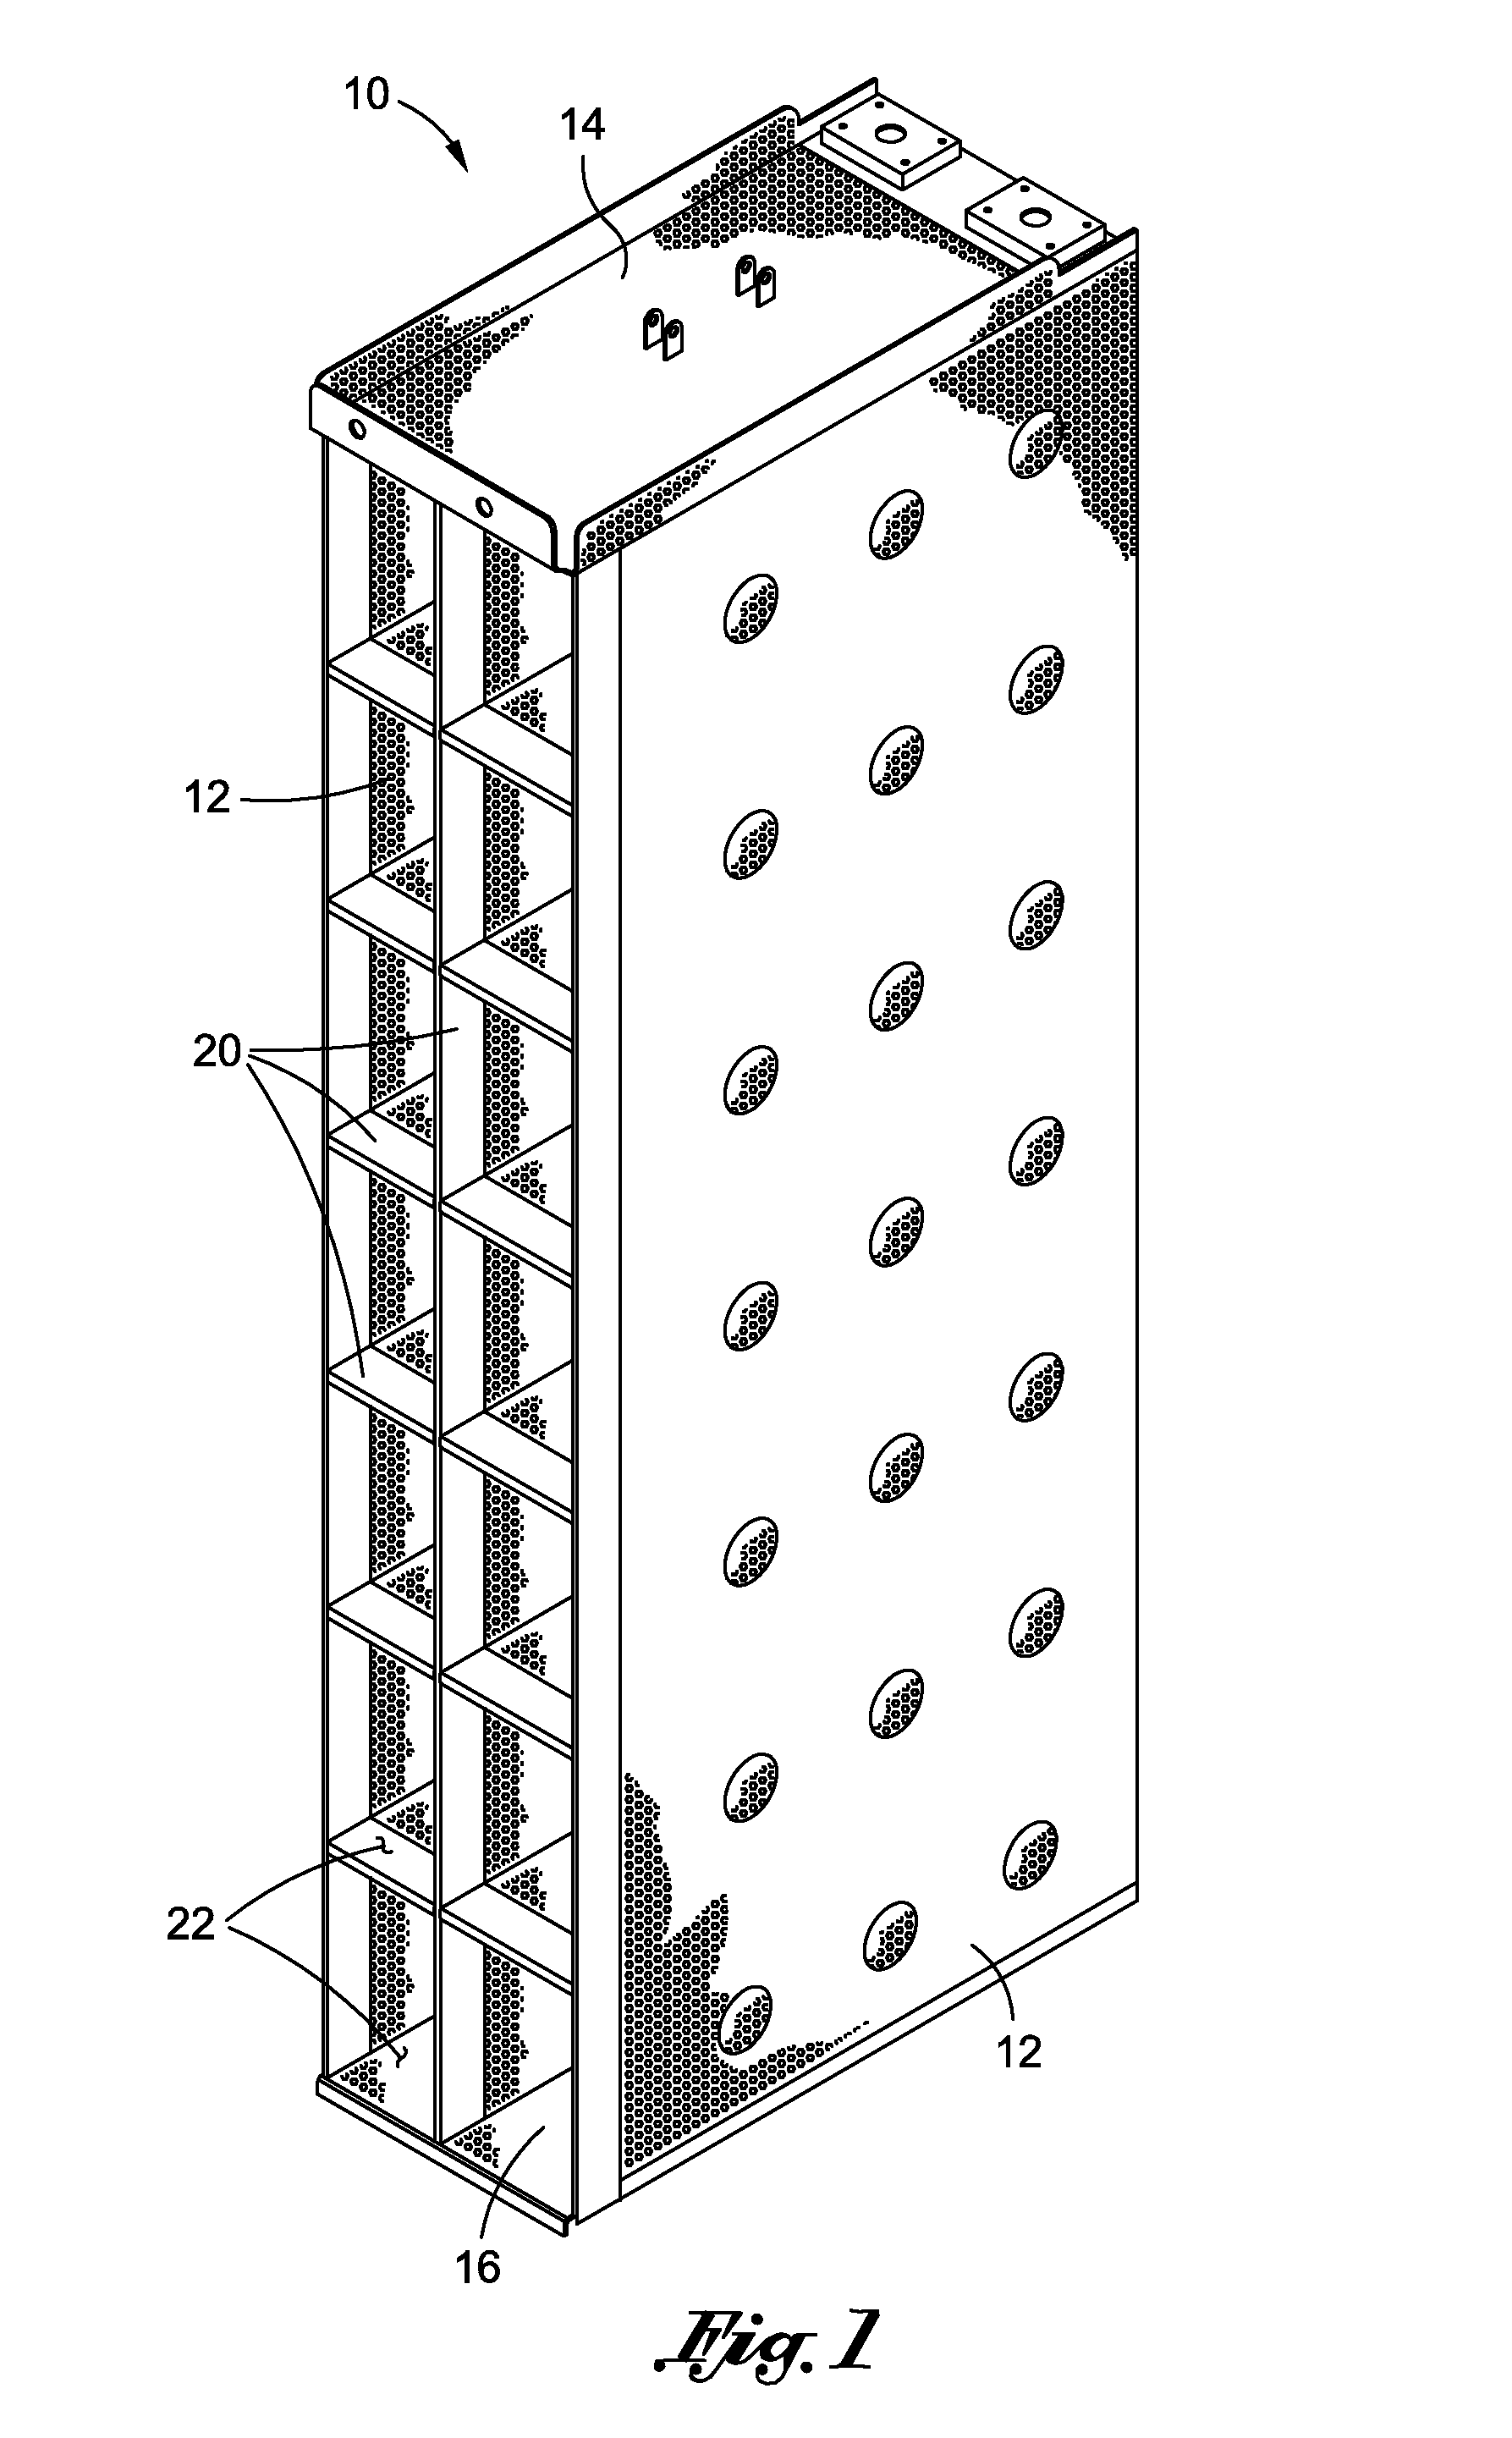 Enhanced nuclear sump strainer system